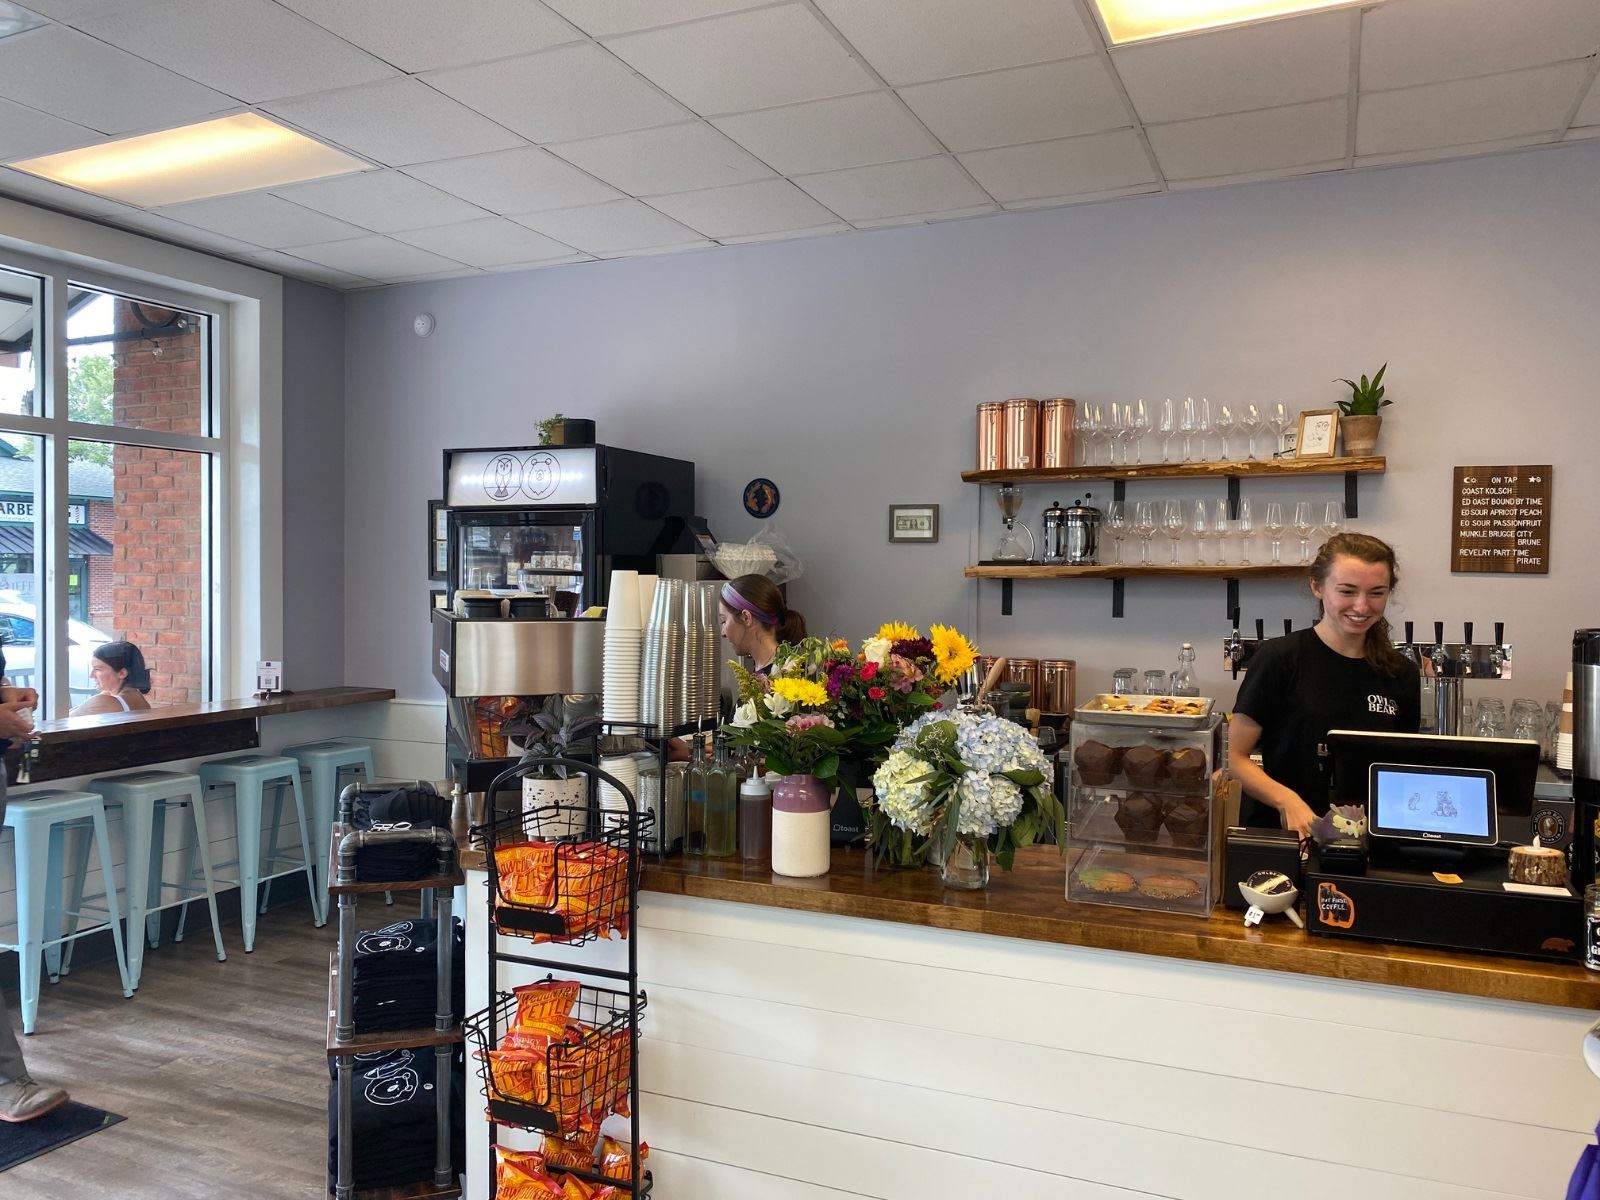 Marshall Tyers and Sarah Reuters have opened the Owlbear Cafe, the first gaming cafe in Mount Pleasant. (Photo/Provided)